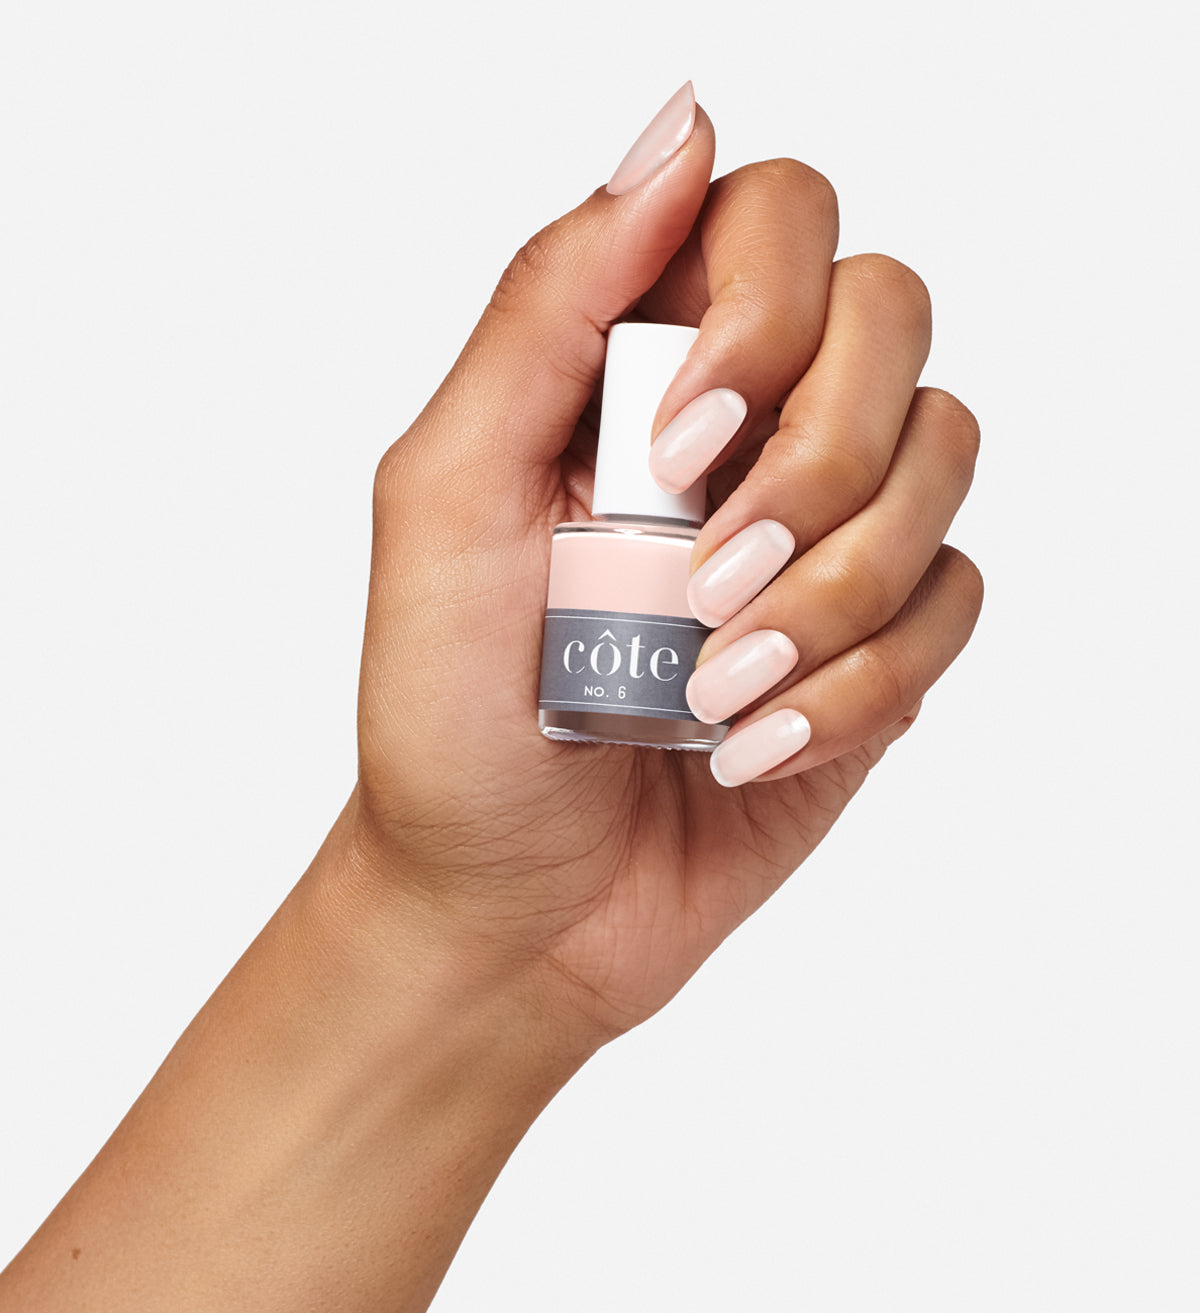 Natural Nail Colors: The Best Nude Nail Polishes To Wear | Vernis à ongles,  Idées vernis à ongles, Ongles gel neutre